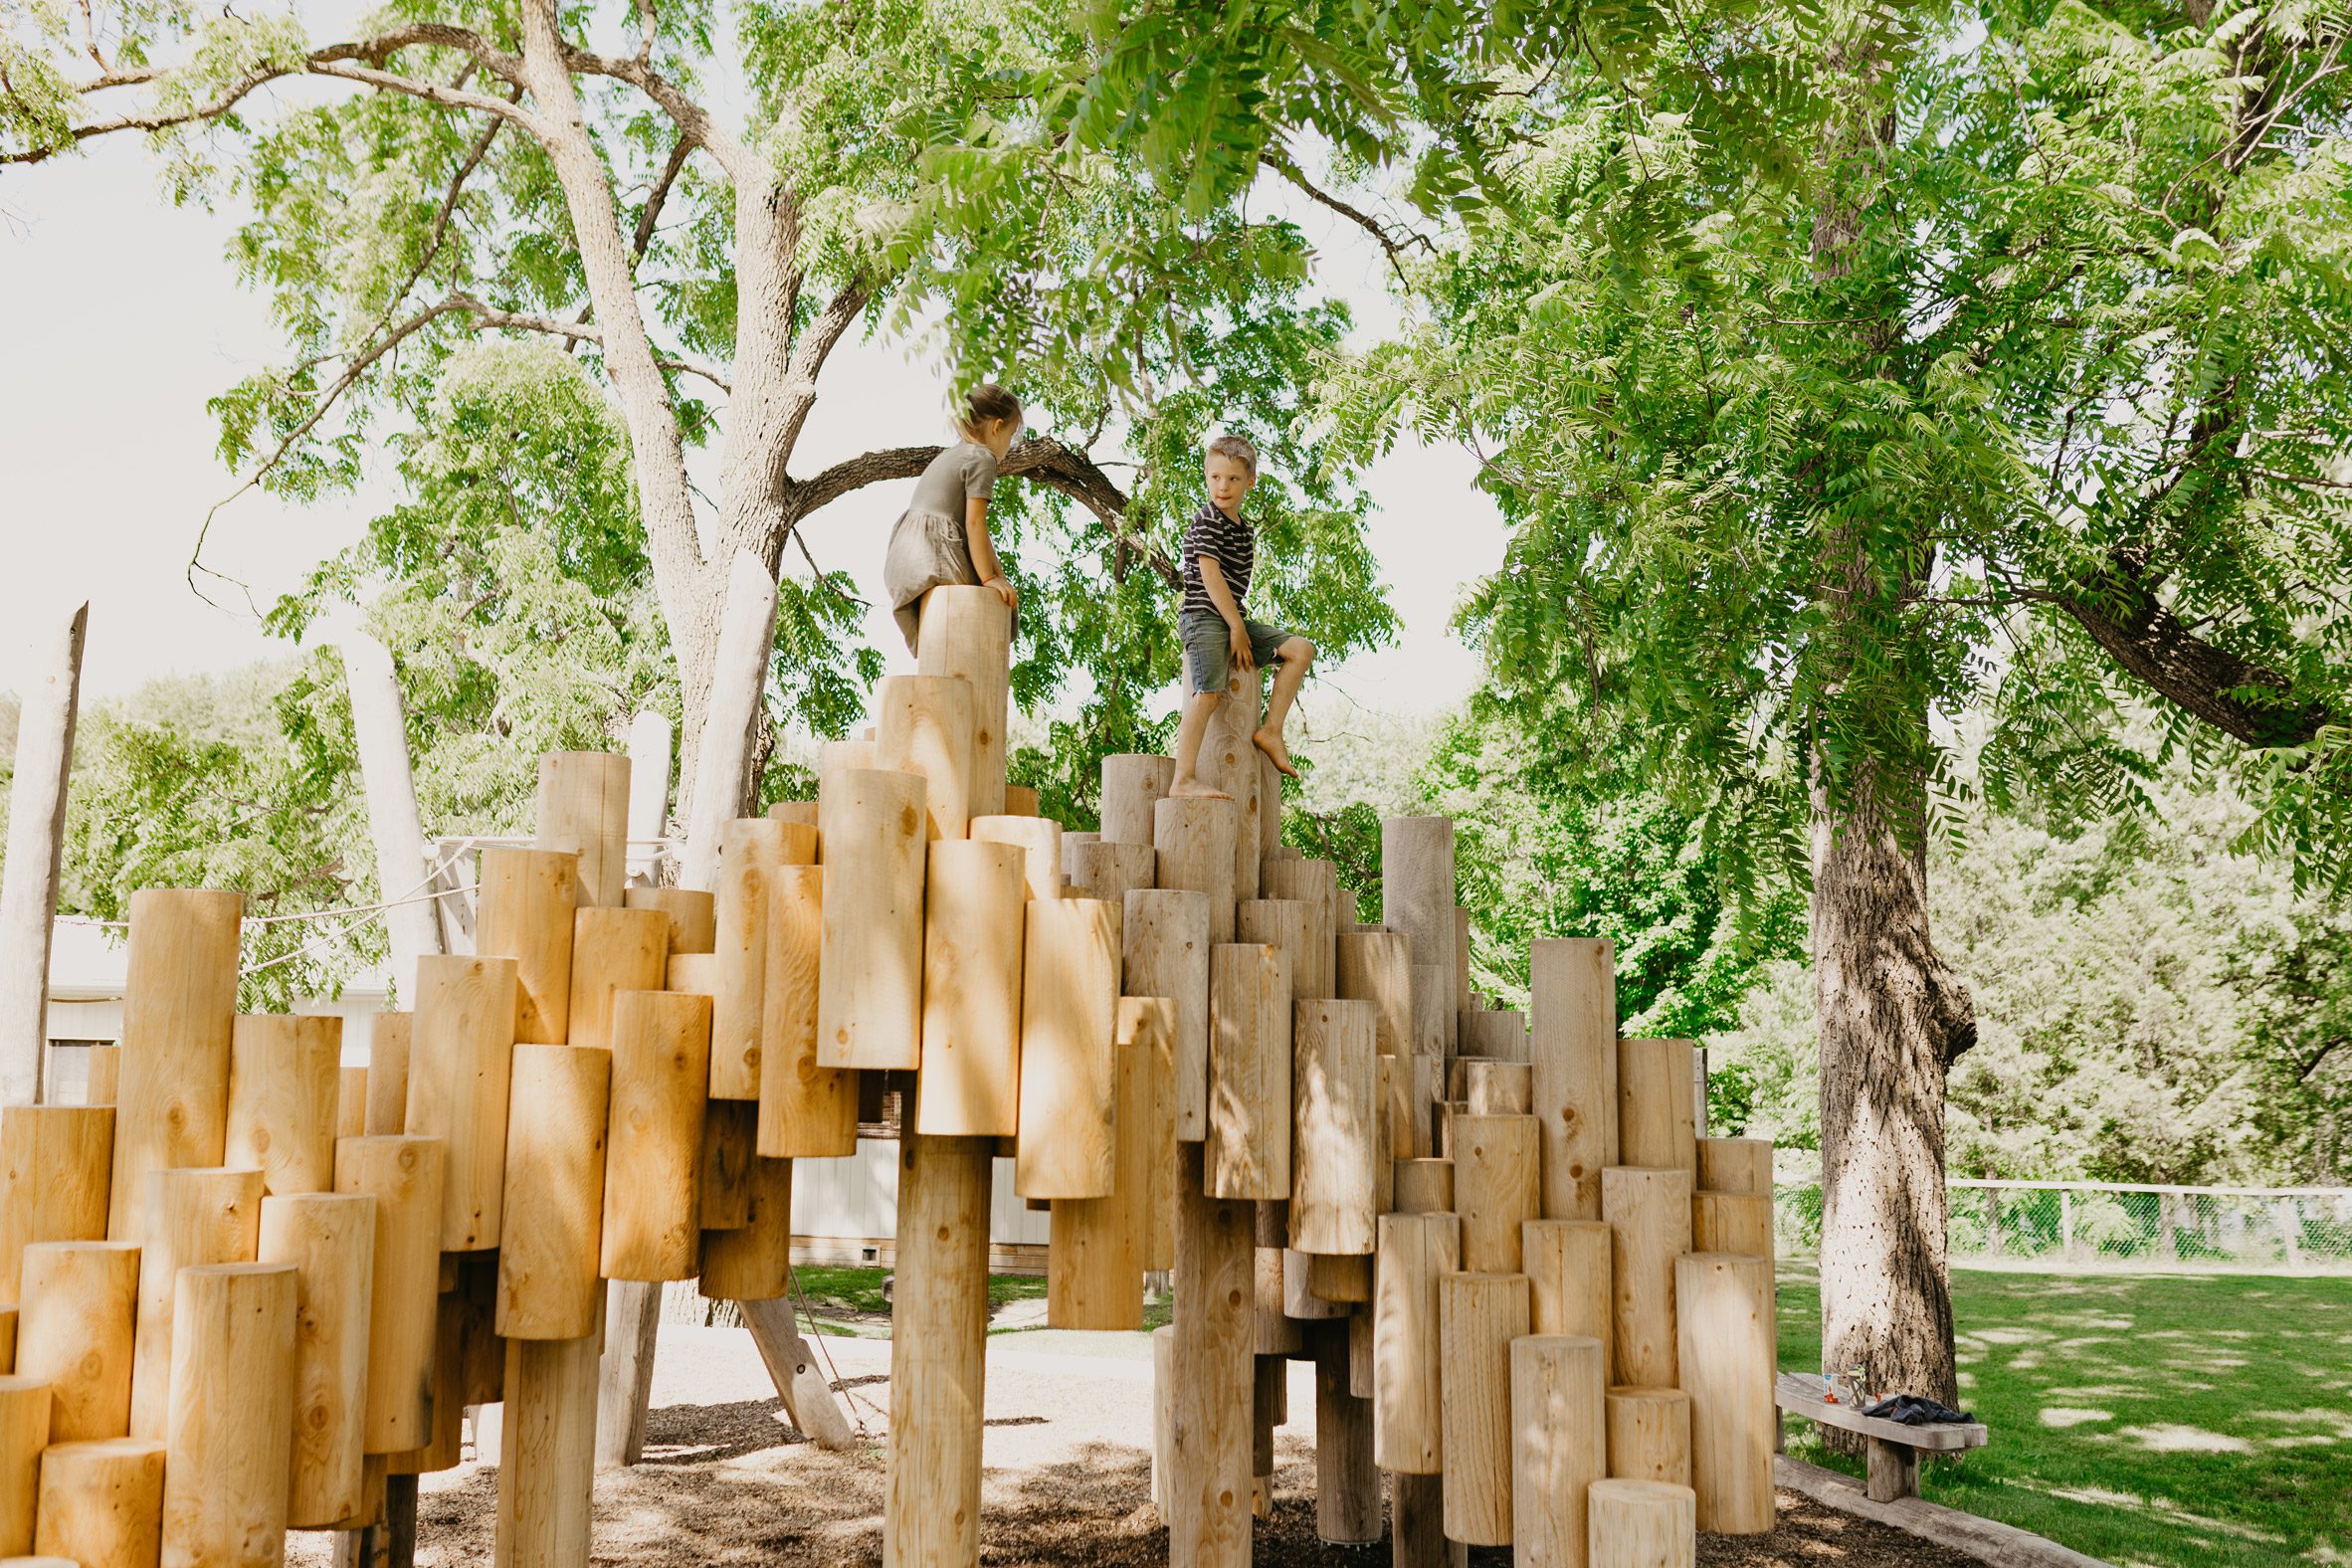 A playground sculpture made of logs